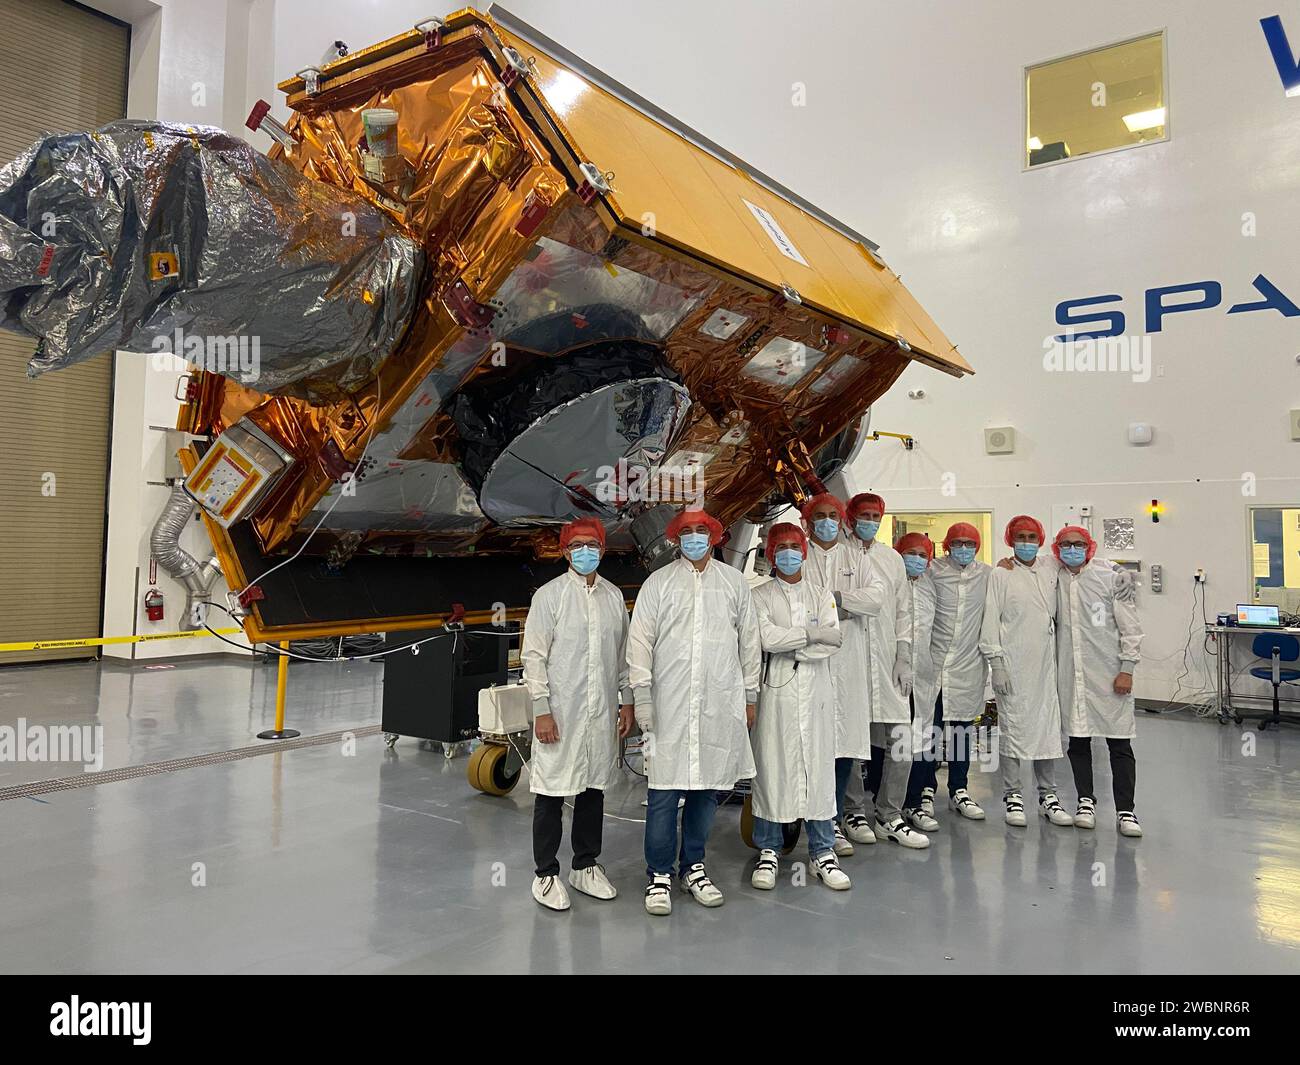 Sentinel-6 Michael Freilich team members from European Space Agency pose with the spacecraft during processing. Launch is scheduled for Nov. 11, 2020 from Vandenberg Air Force Base in California. NASA’s Launch Services Program based at Kennedy Space Center is responsible for launch management. Stock Photo